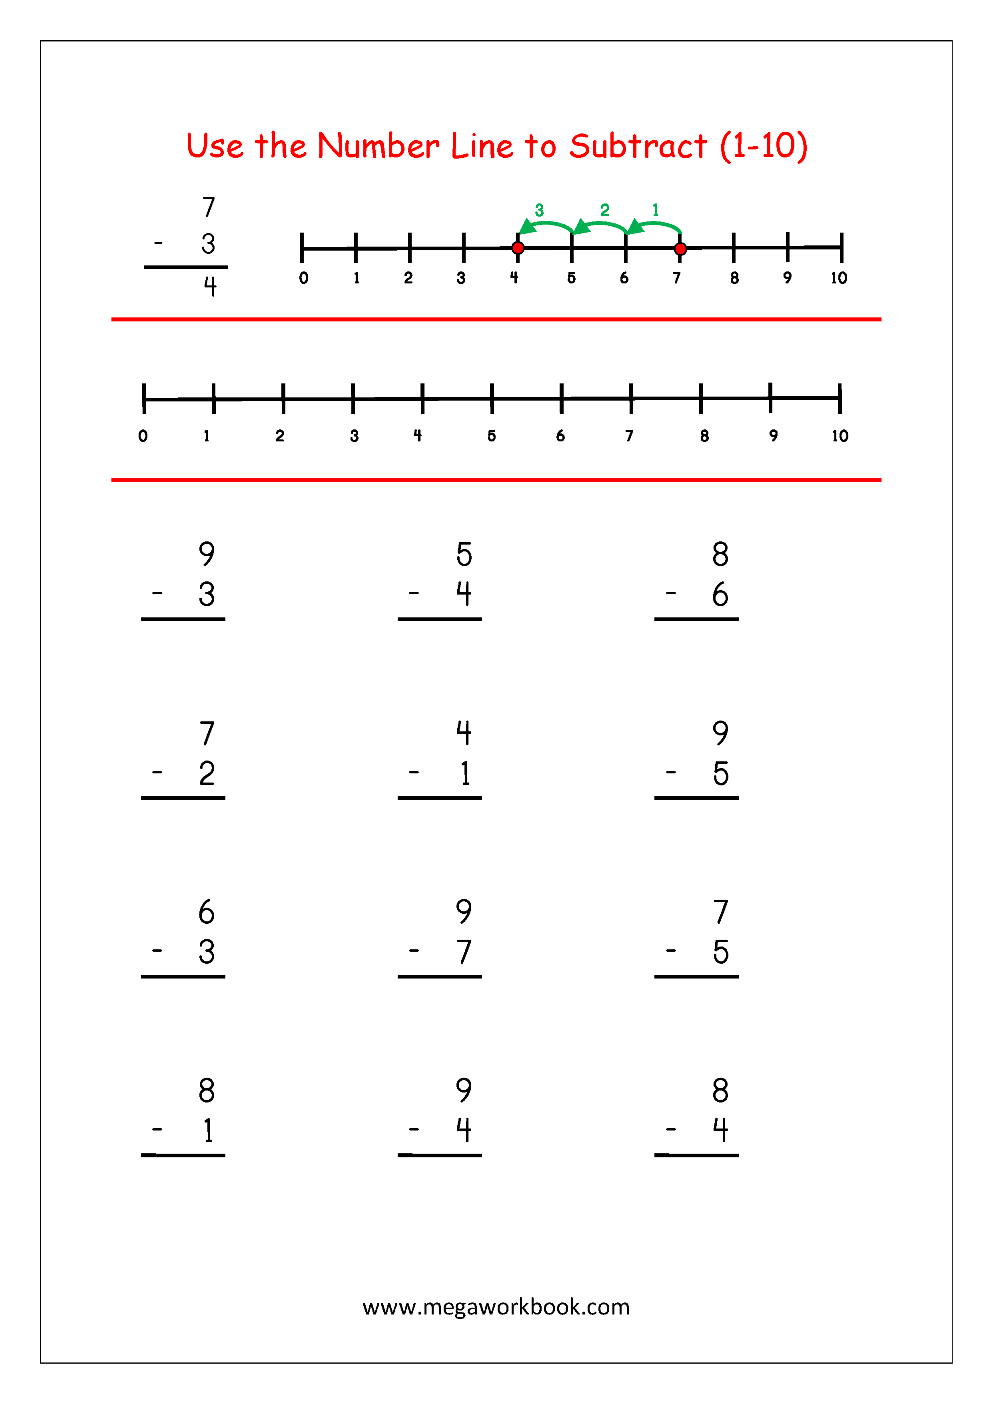 Free Printable Number Subtraction 1 10 Worksheets For Grade 1 And Kindergarten Subtraction With Pictures Objects To Cross Out Subtraction Using Number Line Megaworkbook